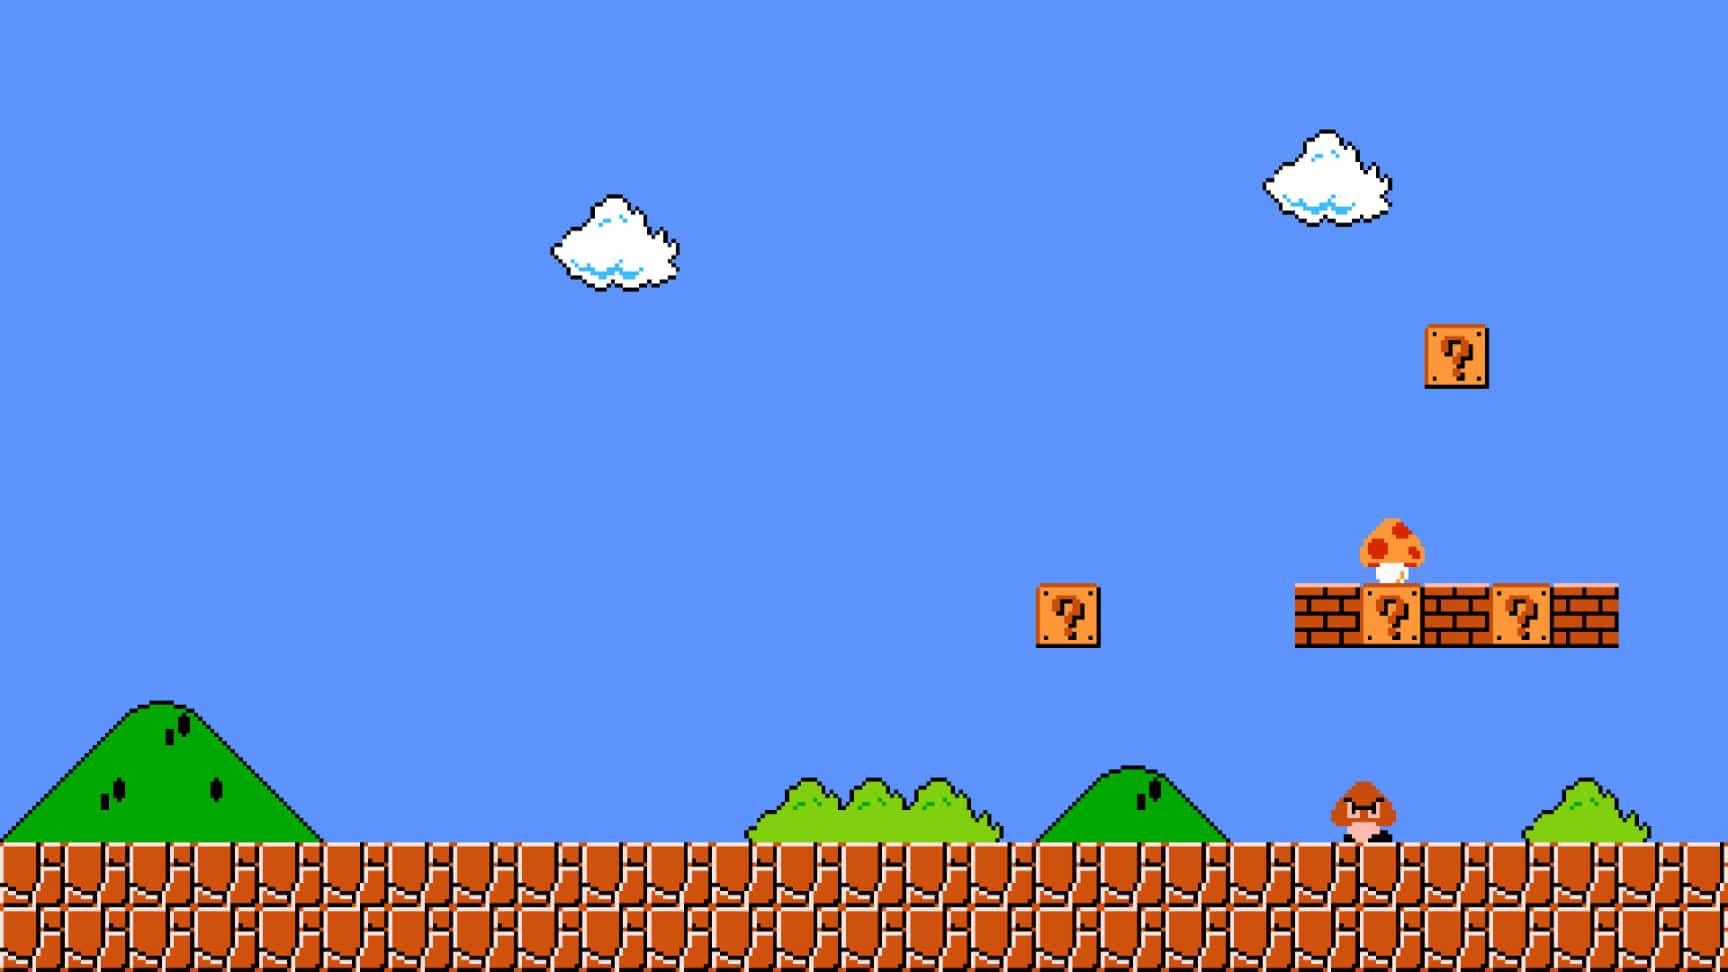 Caption: Mario embarks on an adventure within the vibrant and challenging world of Super Mario Land. Wallpaper